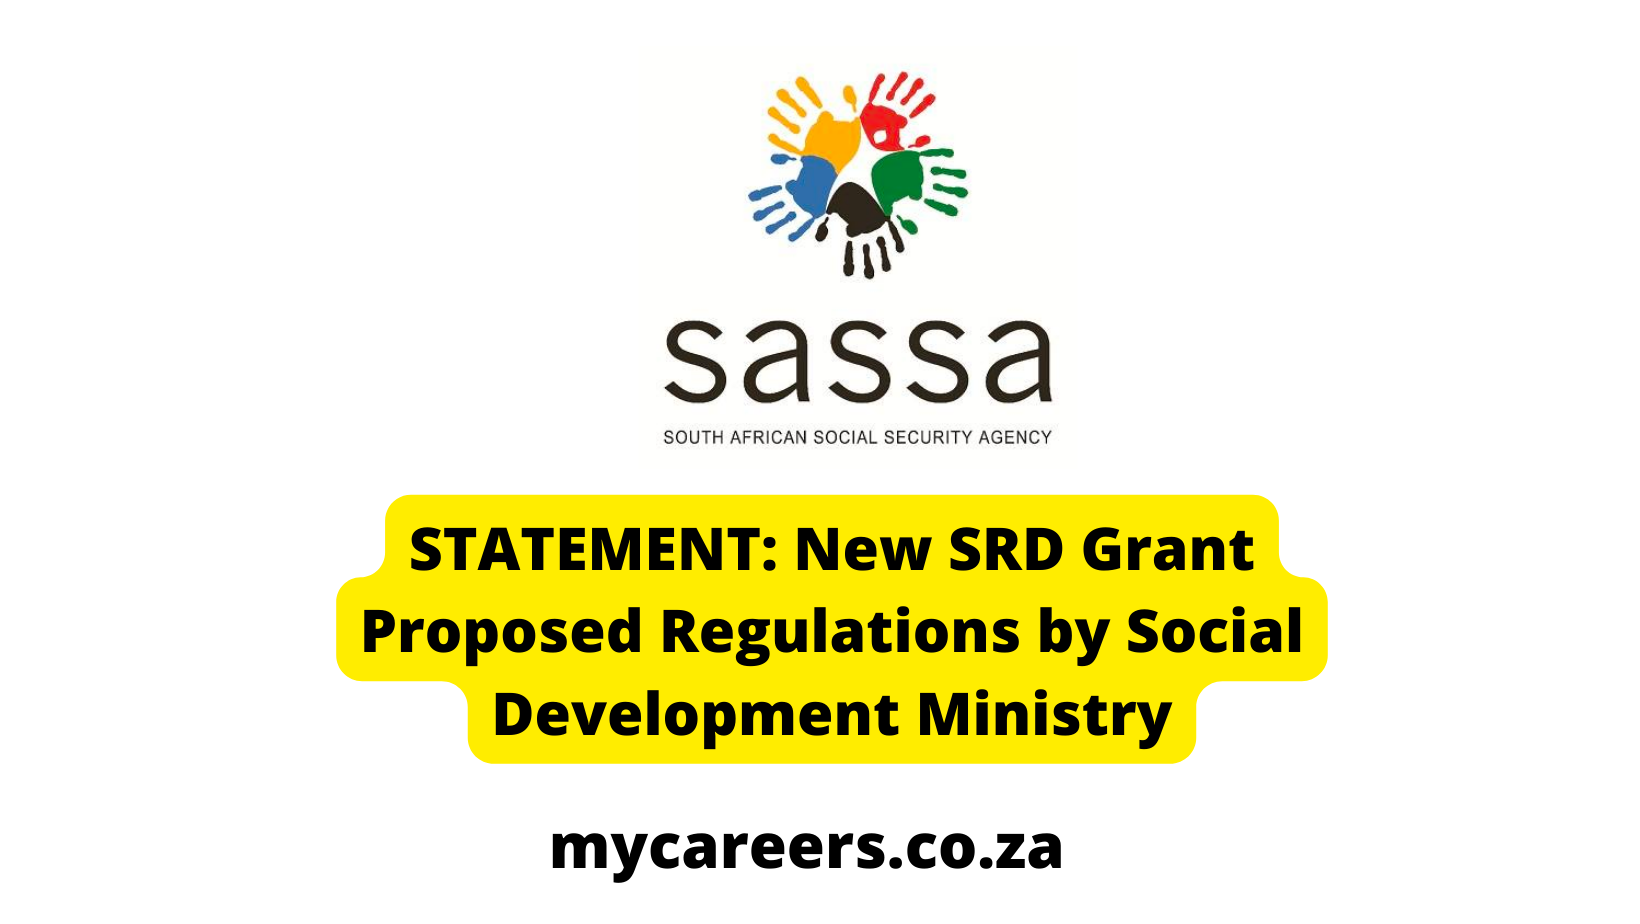 STATEMENT: New SRD Grant Proposed Regulations by Social Development Ministry